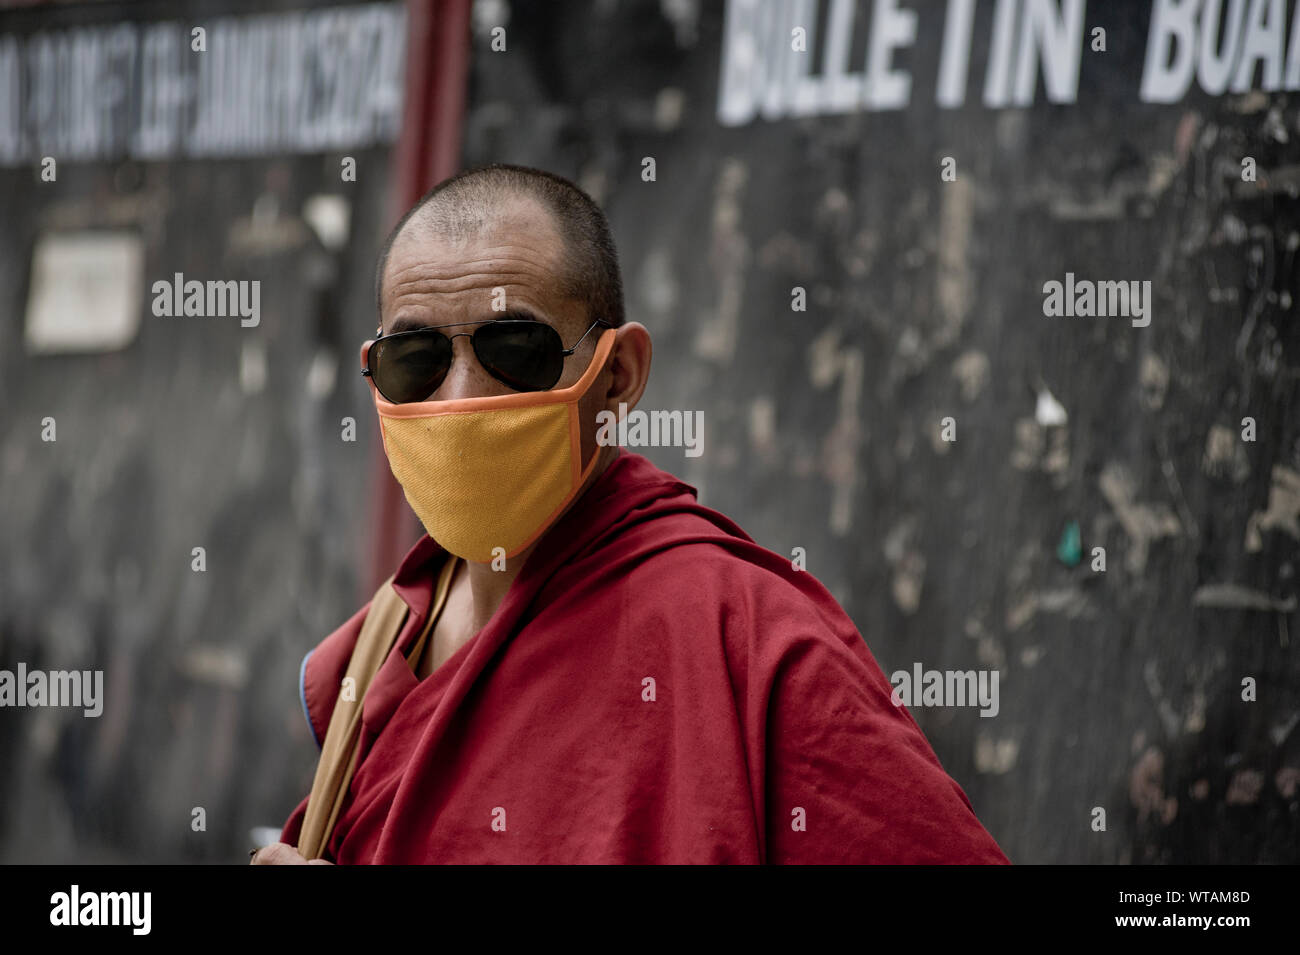 Monk in the streets of Leh wearing kasaya robe and anti-pollution mask Stock Photo